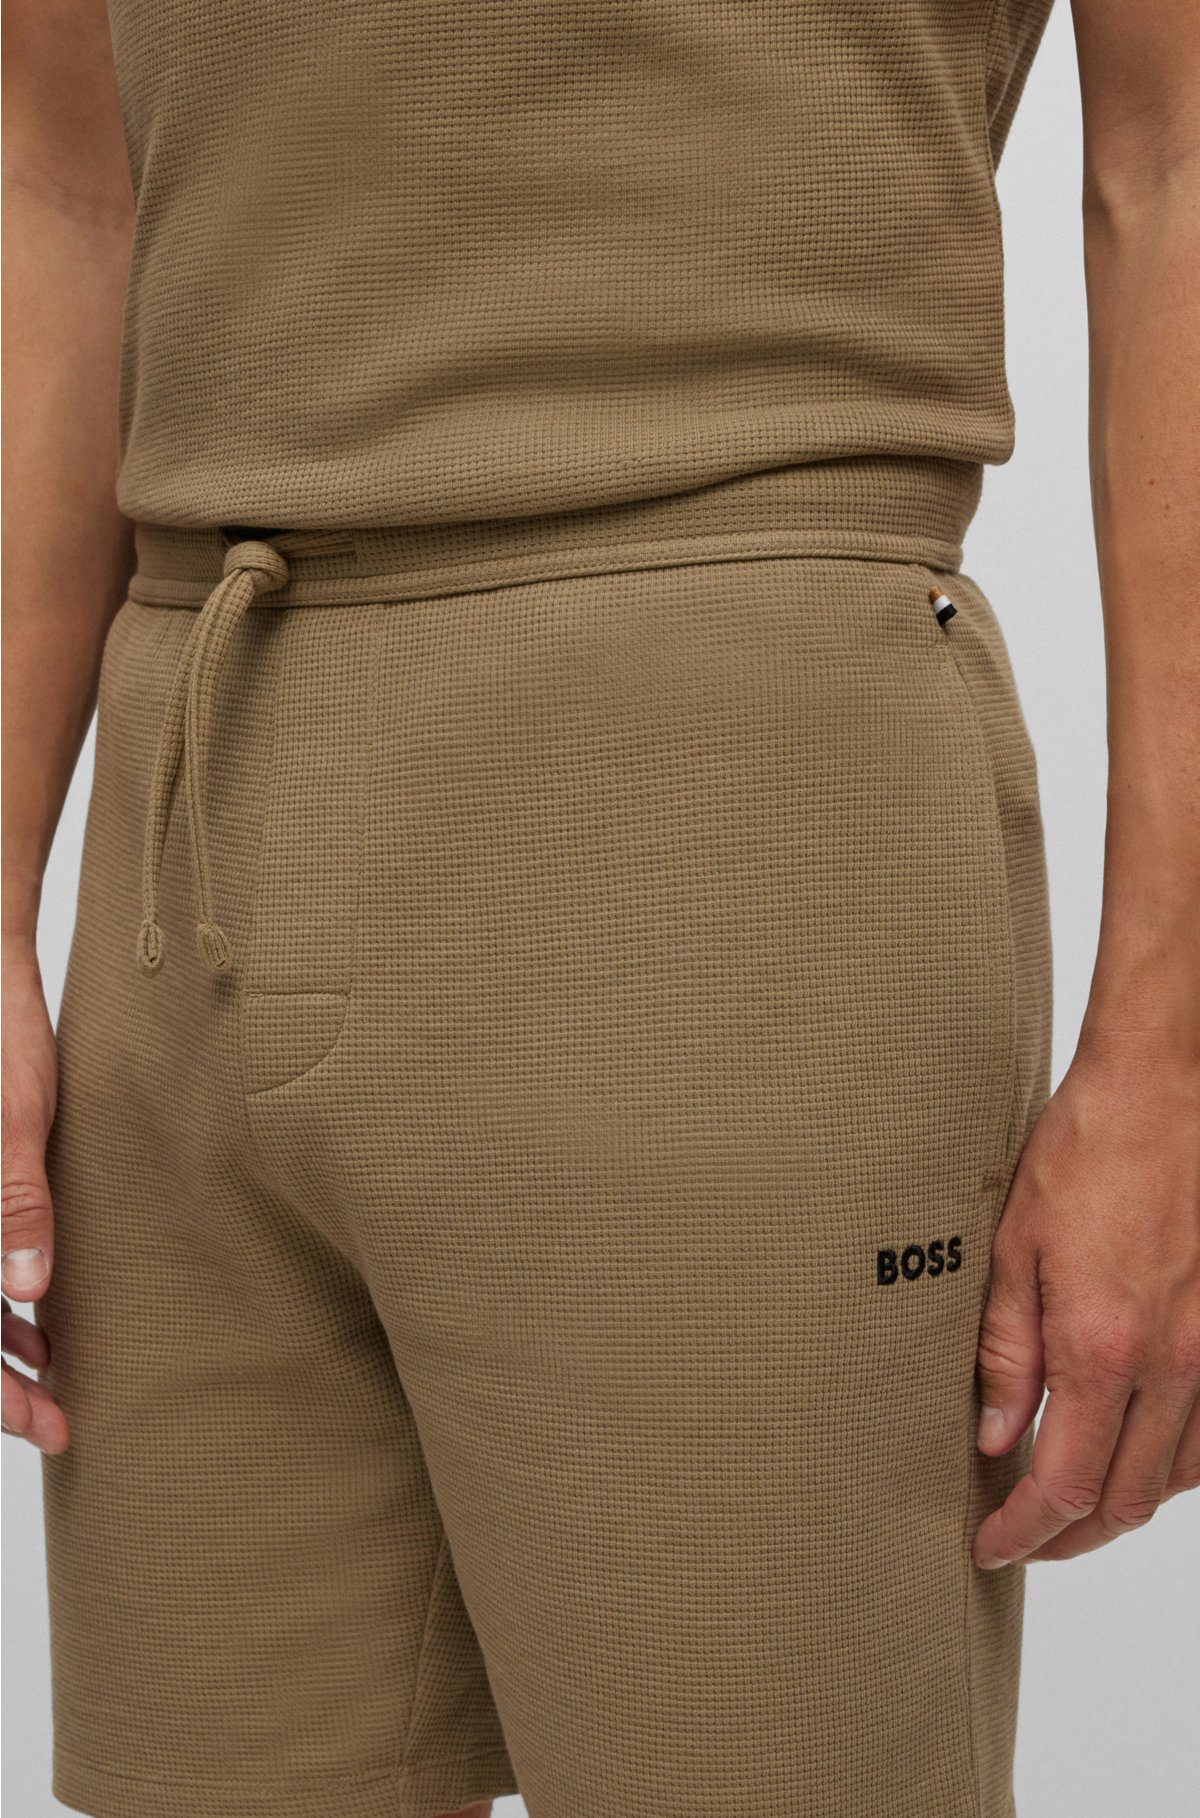 BOSS - Pajama shorts logo with embroidered